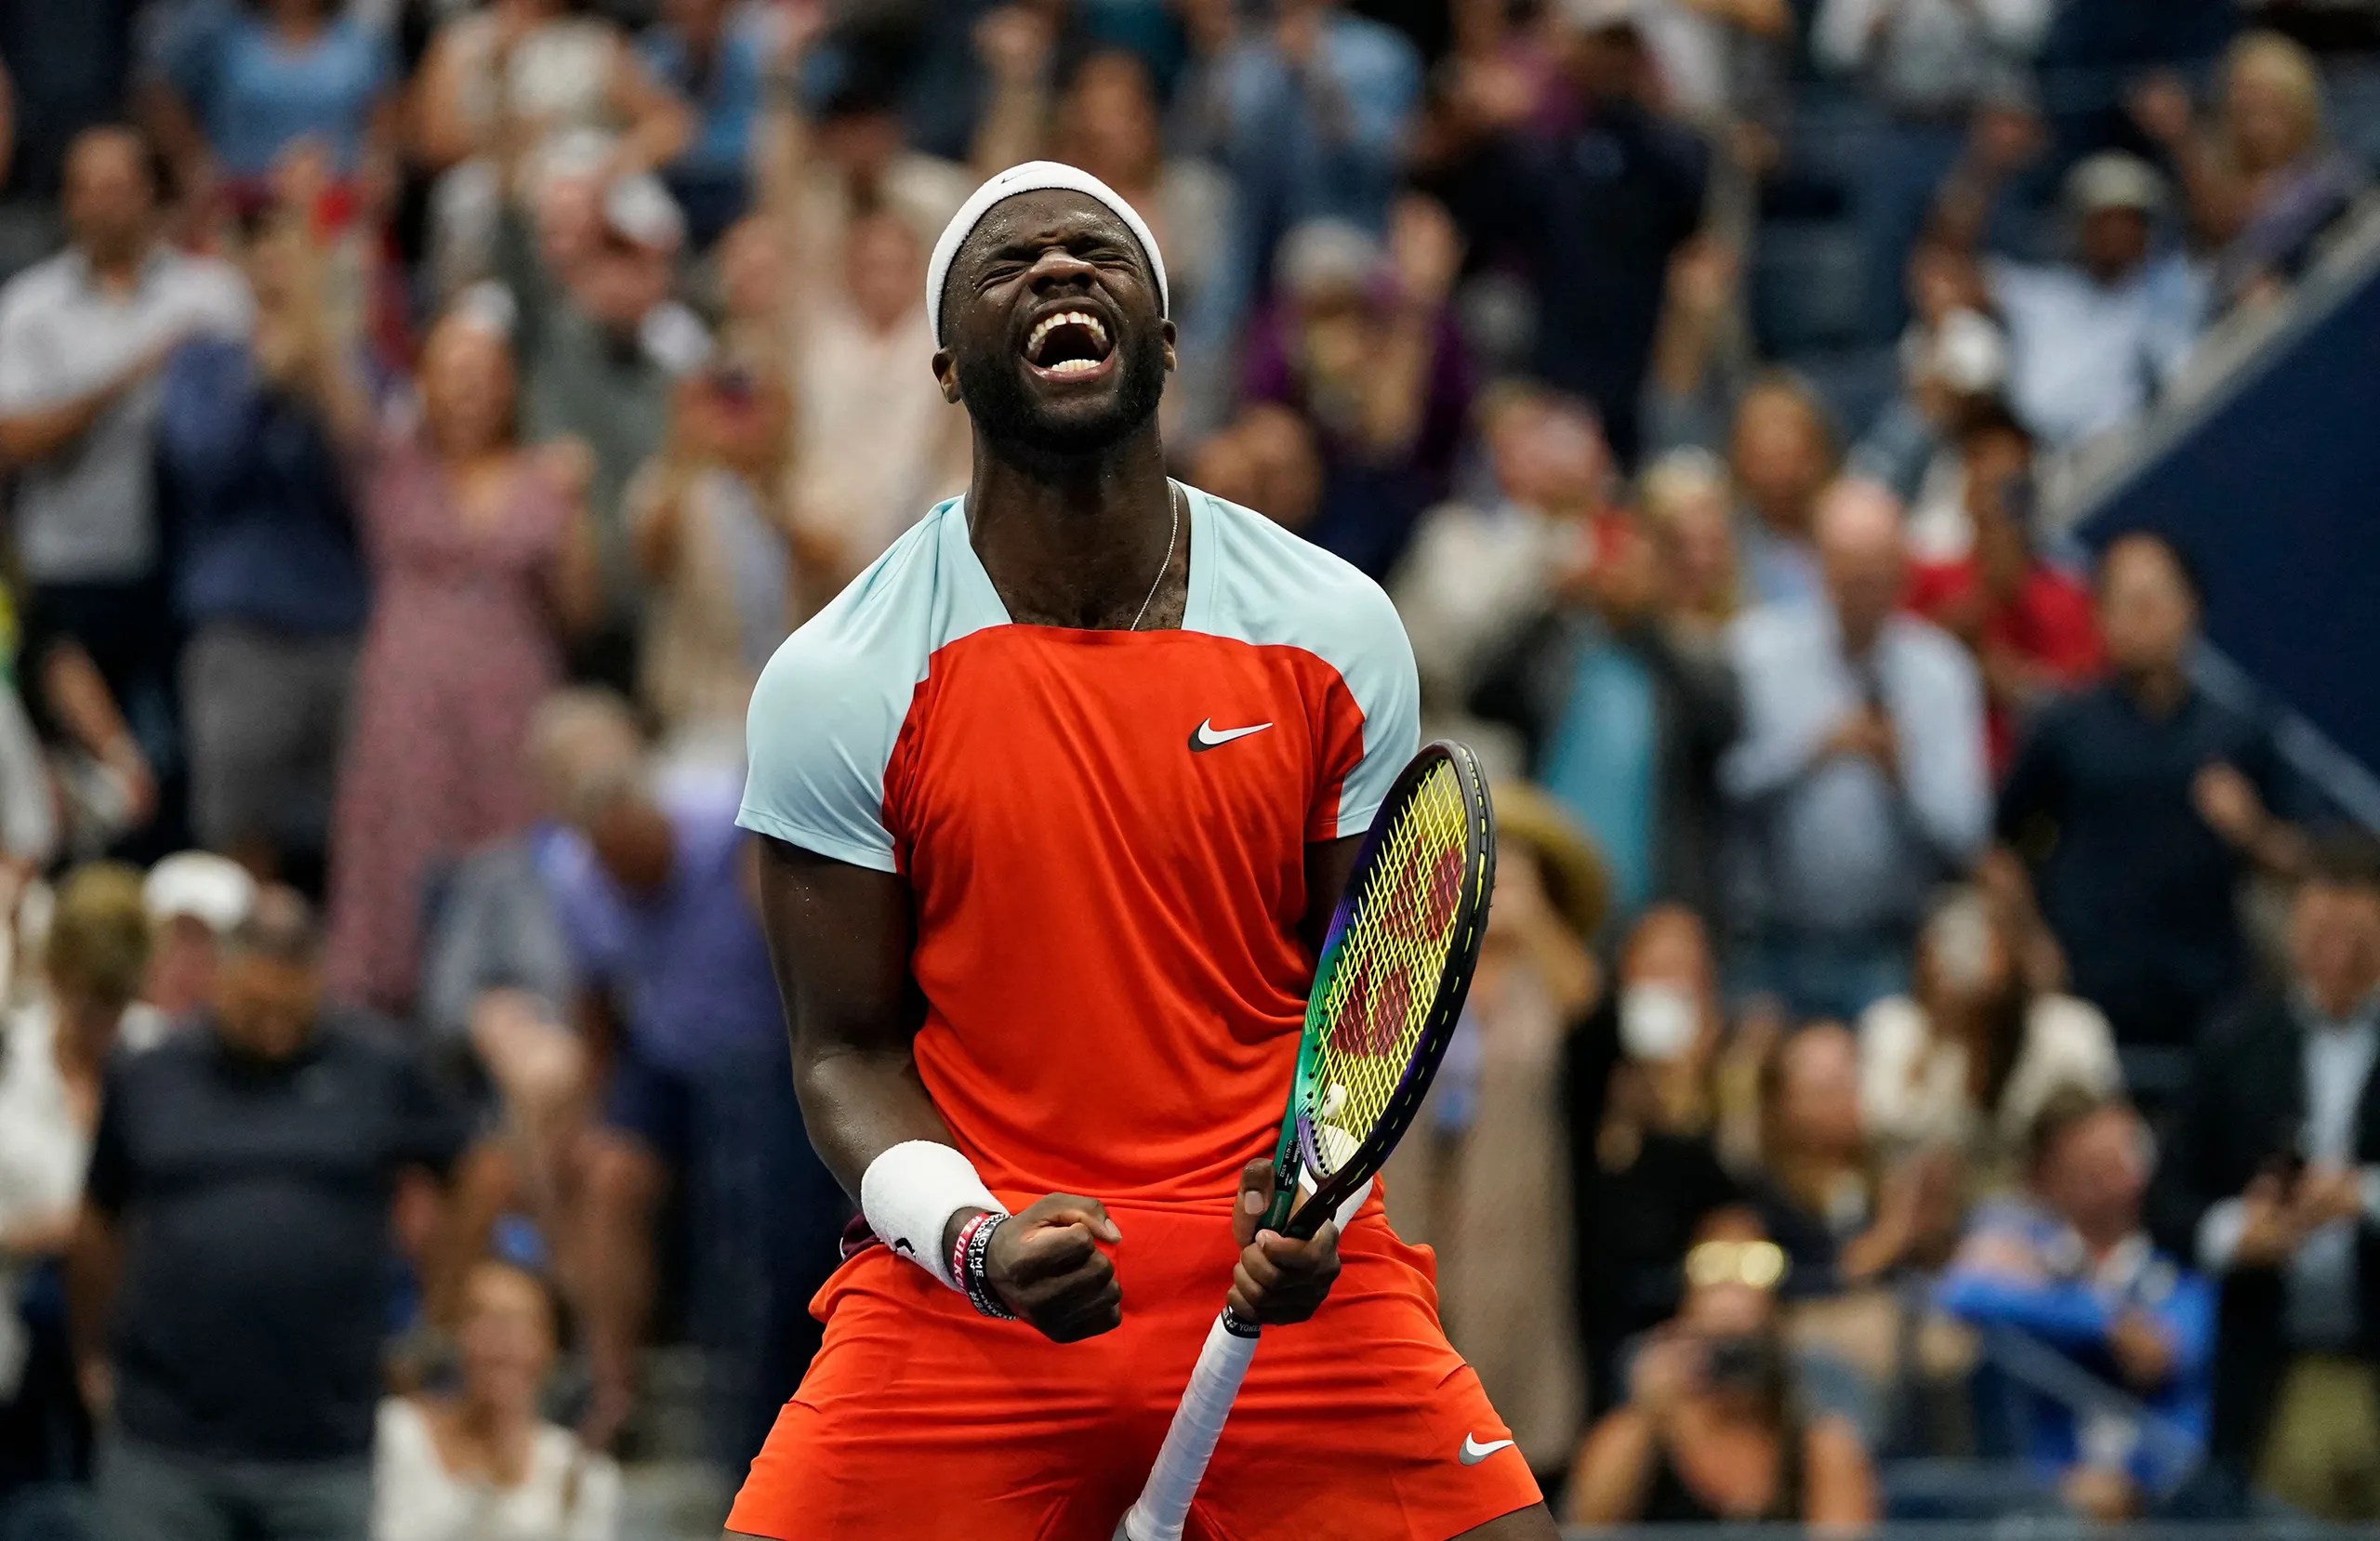 Japan Open 2022: Frances Tiafoe defies 'really bad' jet lag to cruise into Japan Open semis